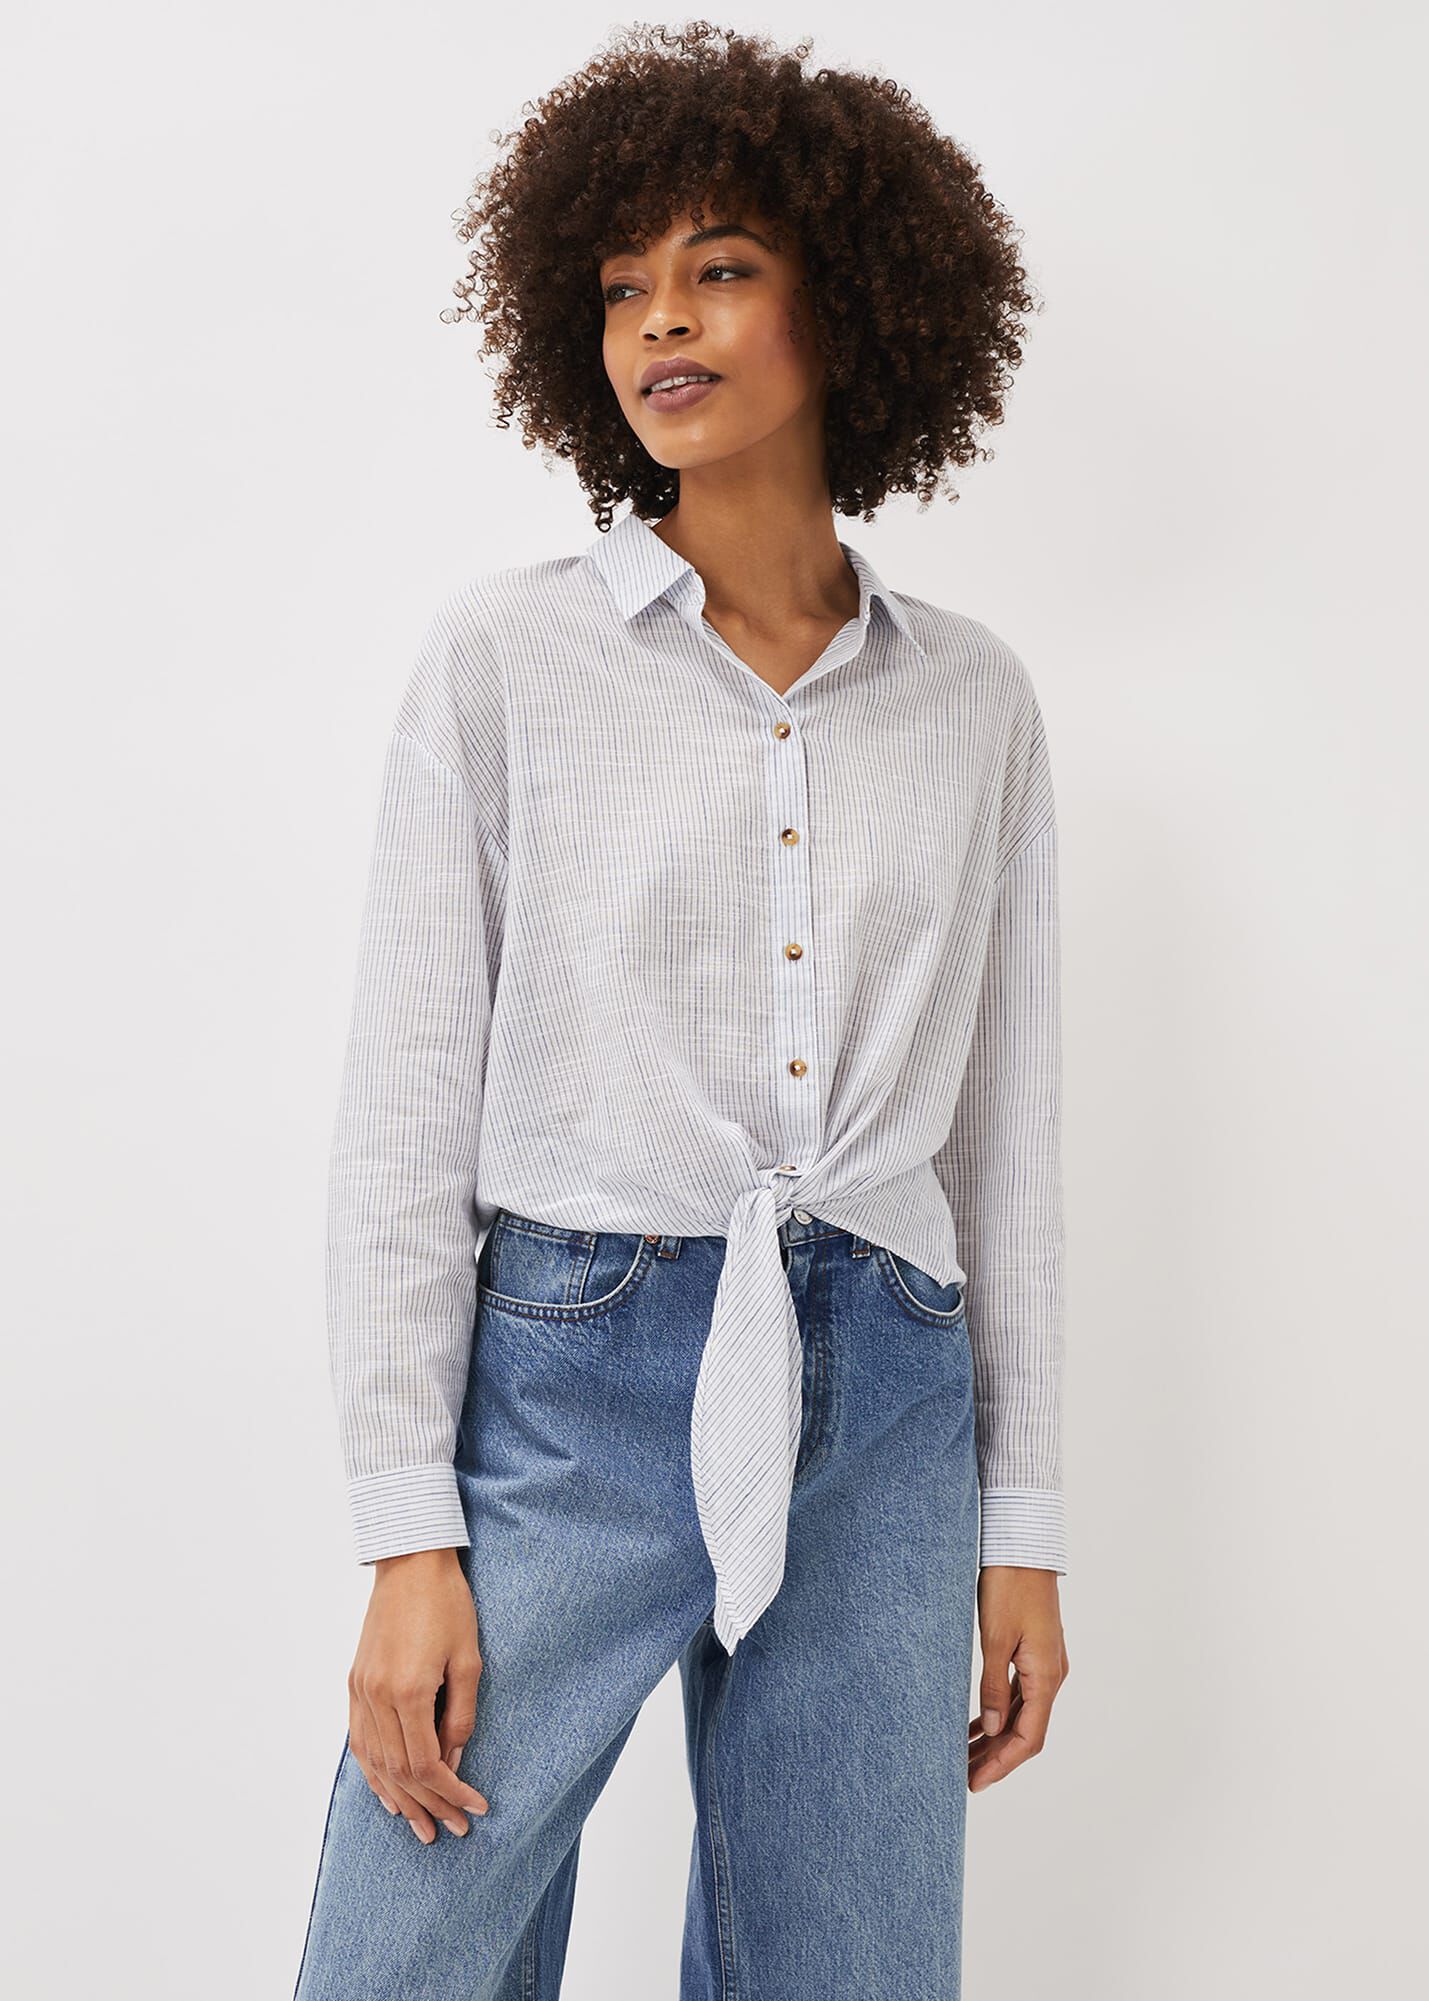 Women's Tops ☀ Blouses | Going Out Tops ...